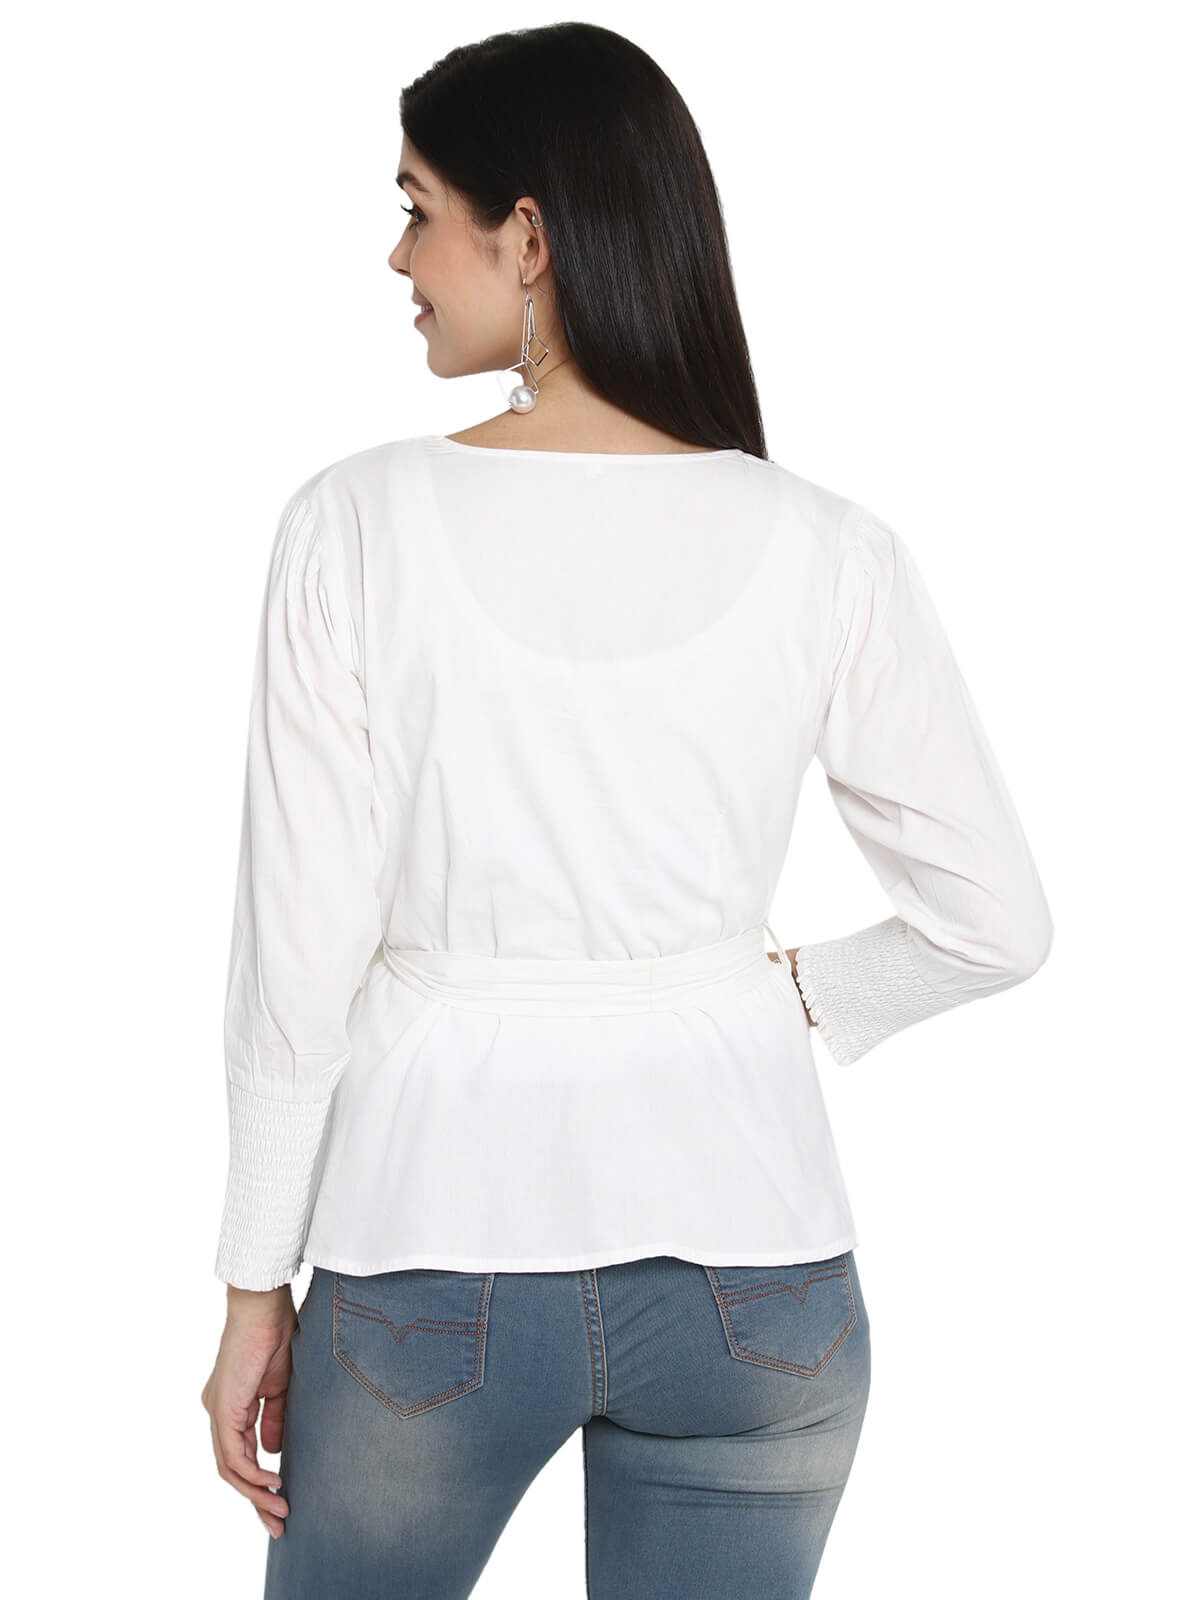 White Solid Overlap Top With Elastic Detailing At Sleeve